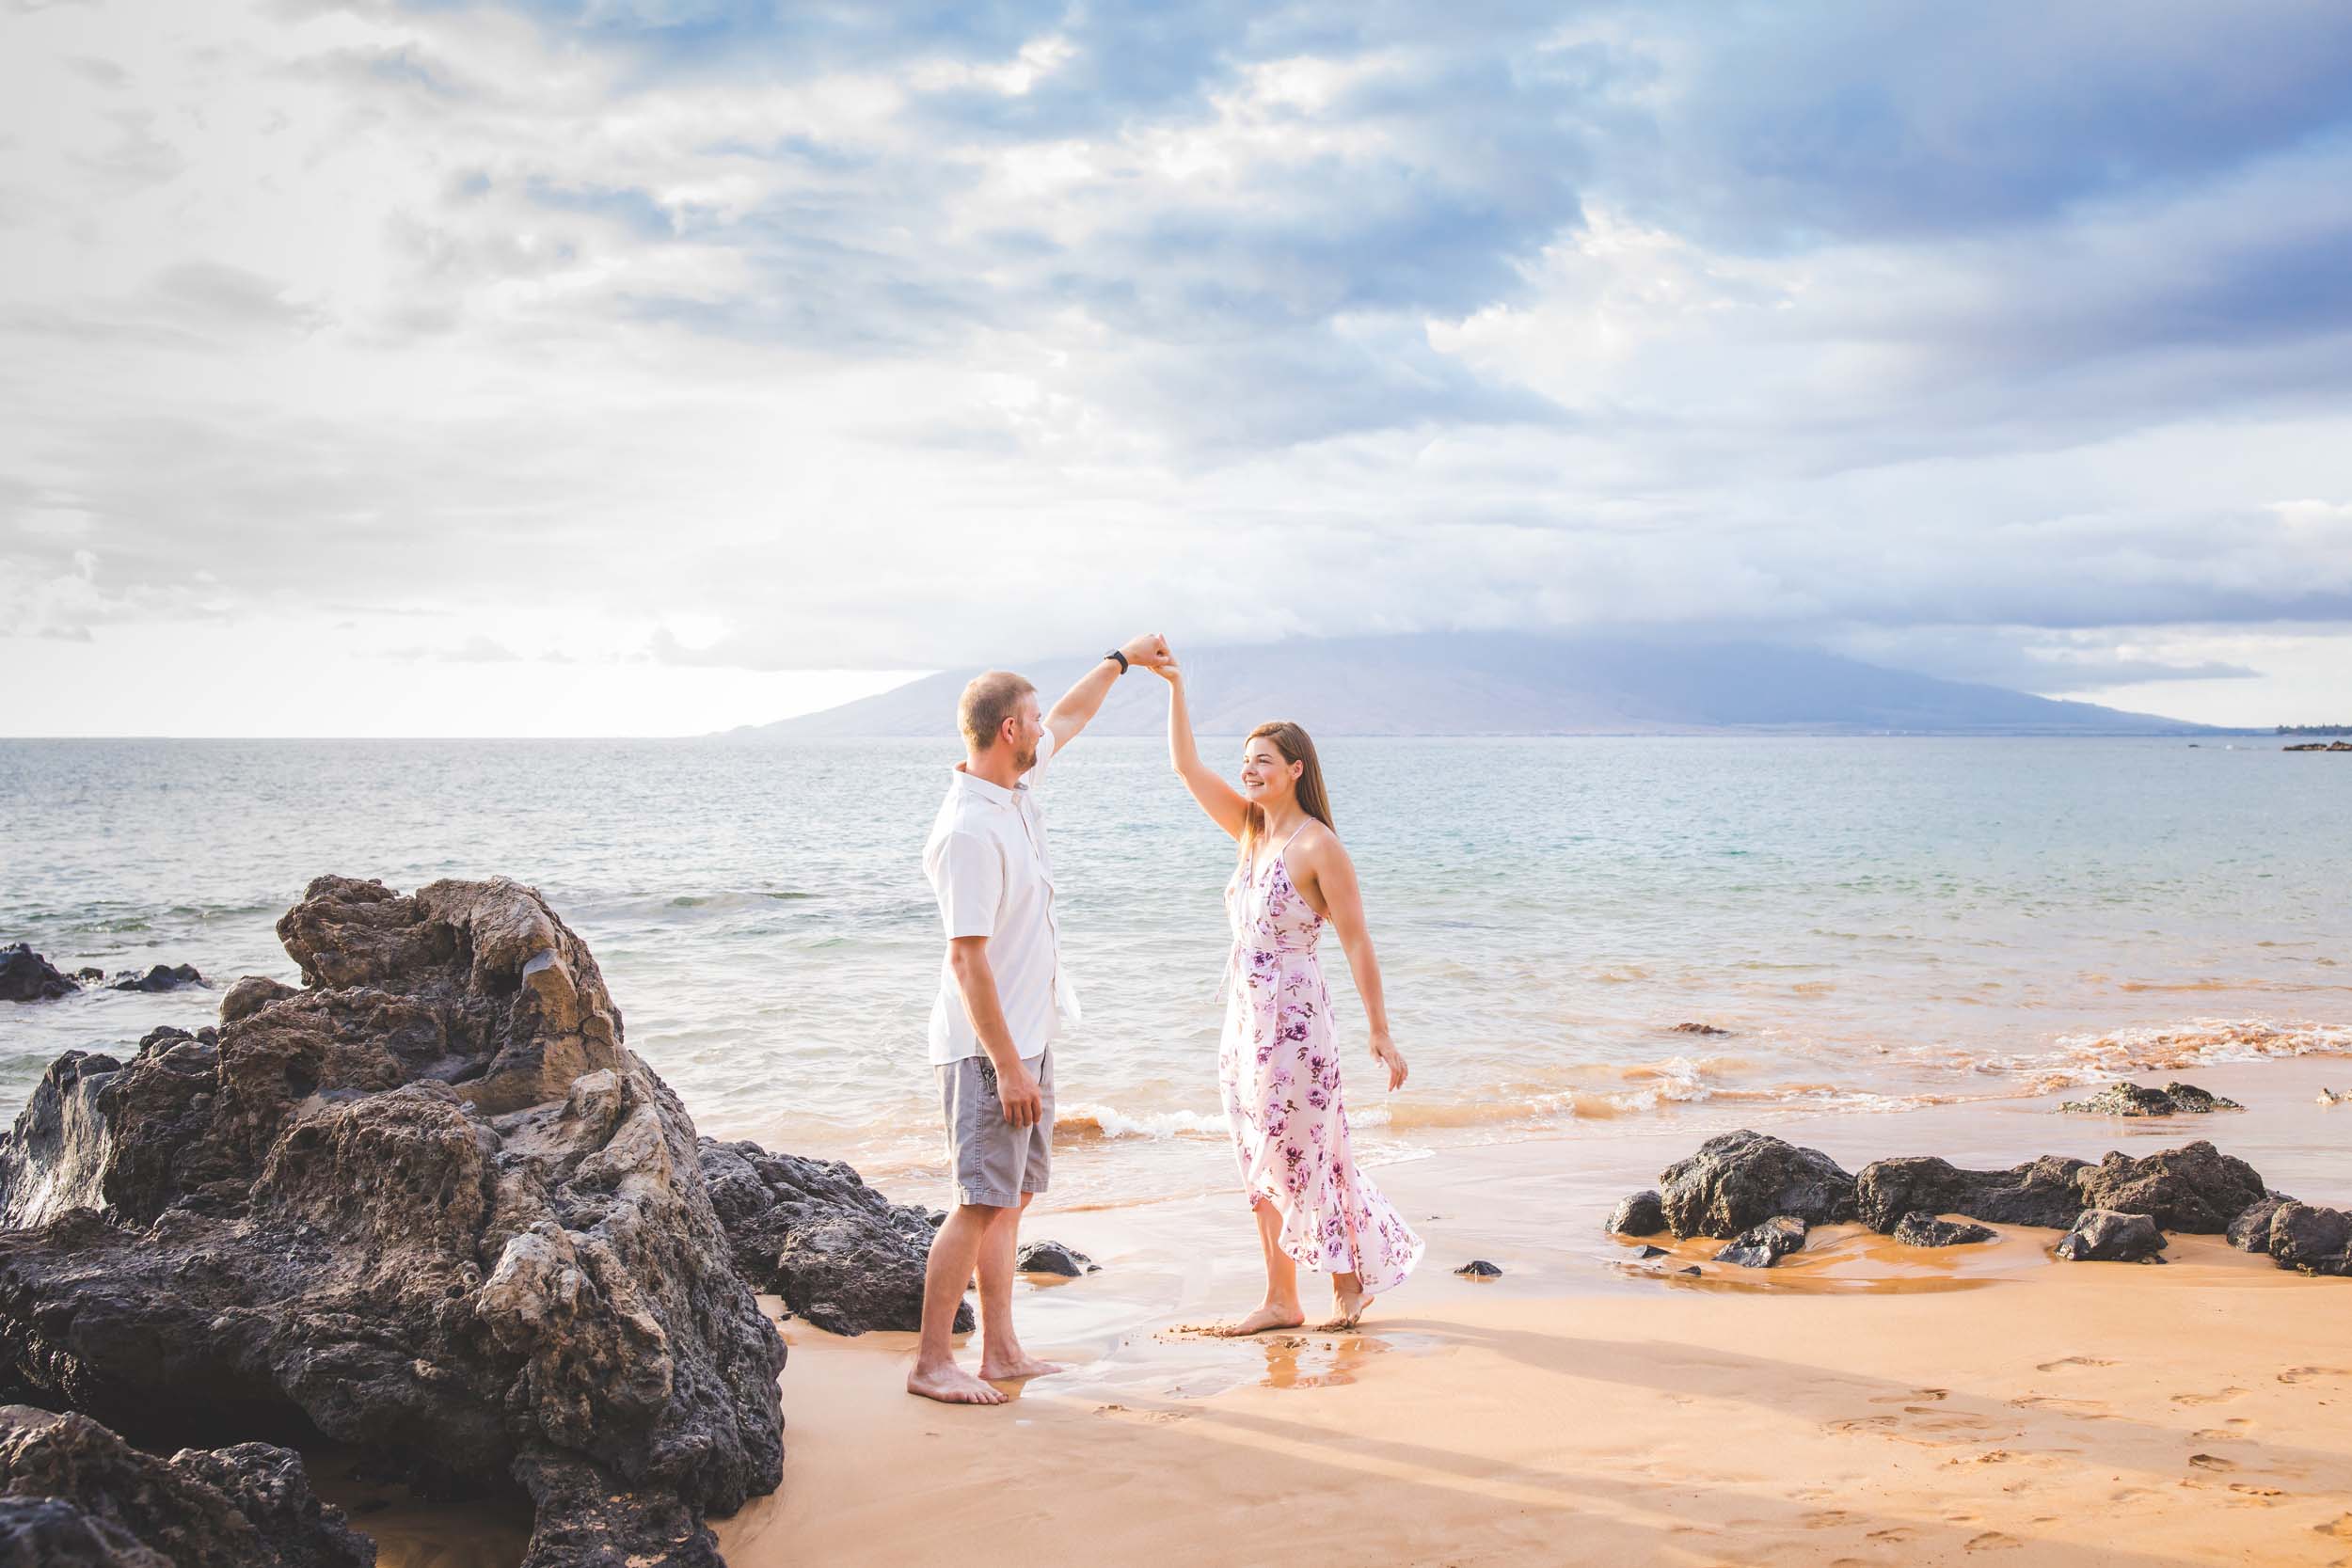 Couple dancing on the beach together in Maui, USA